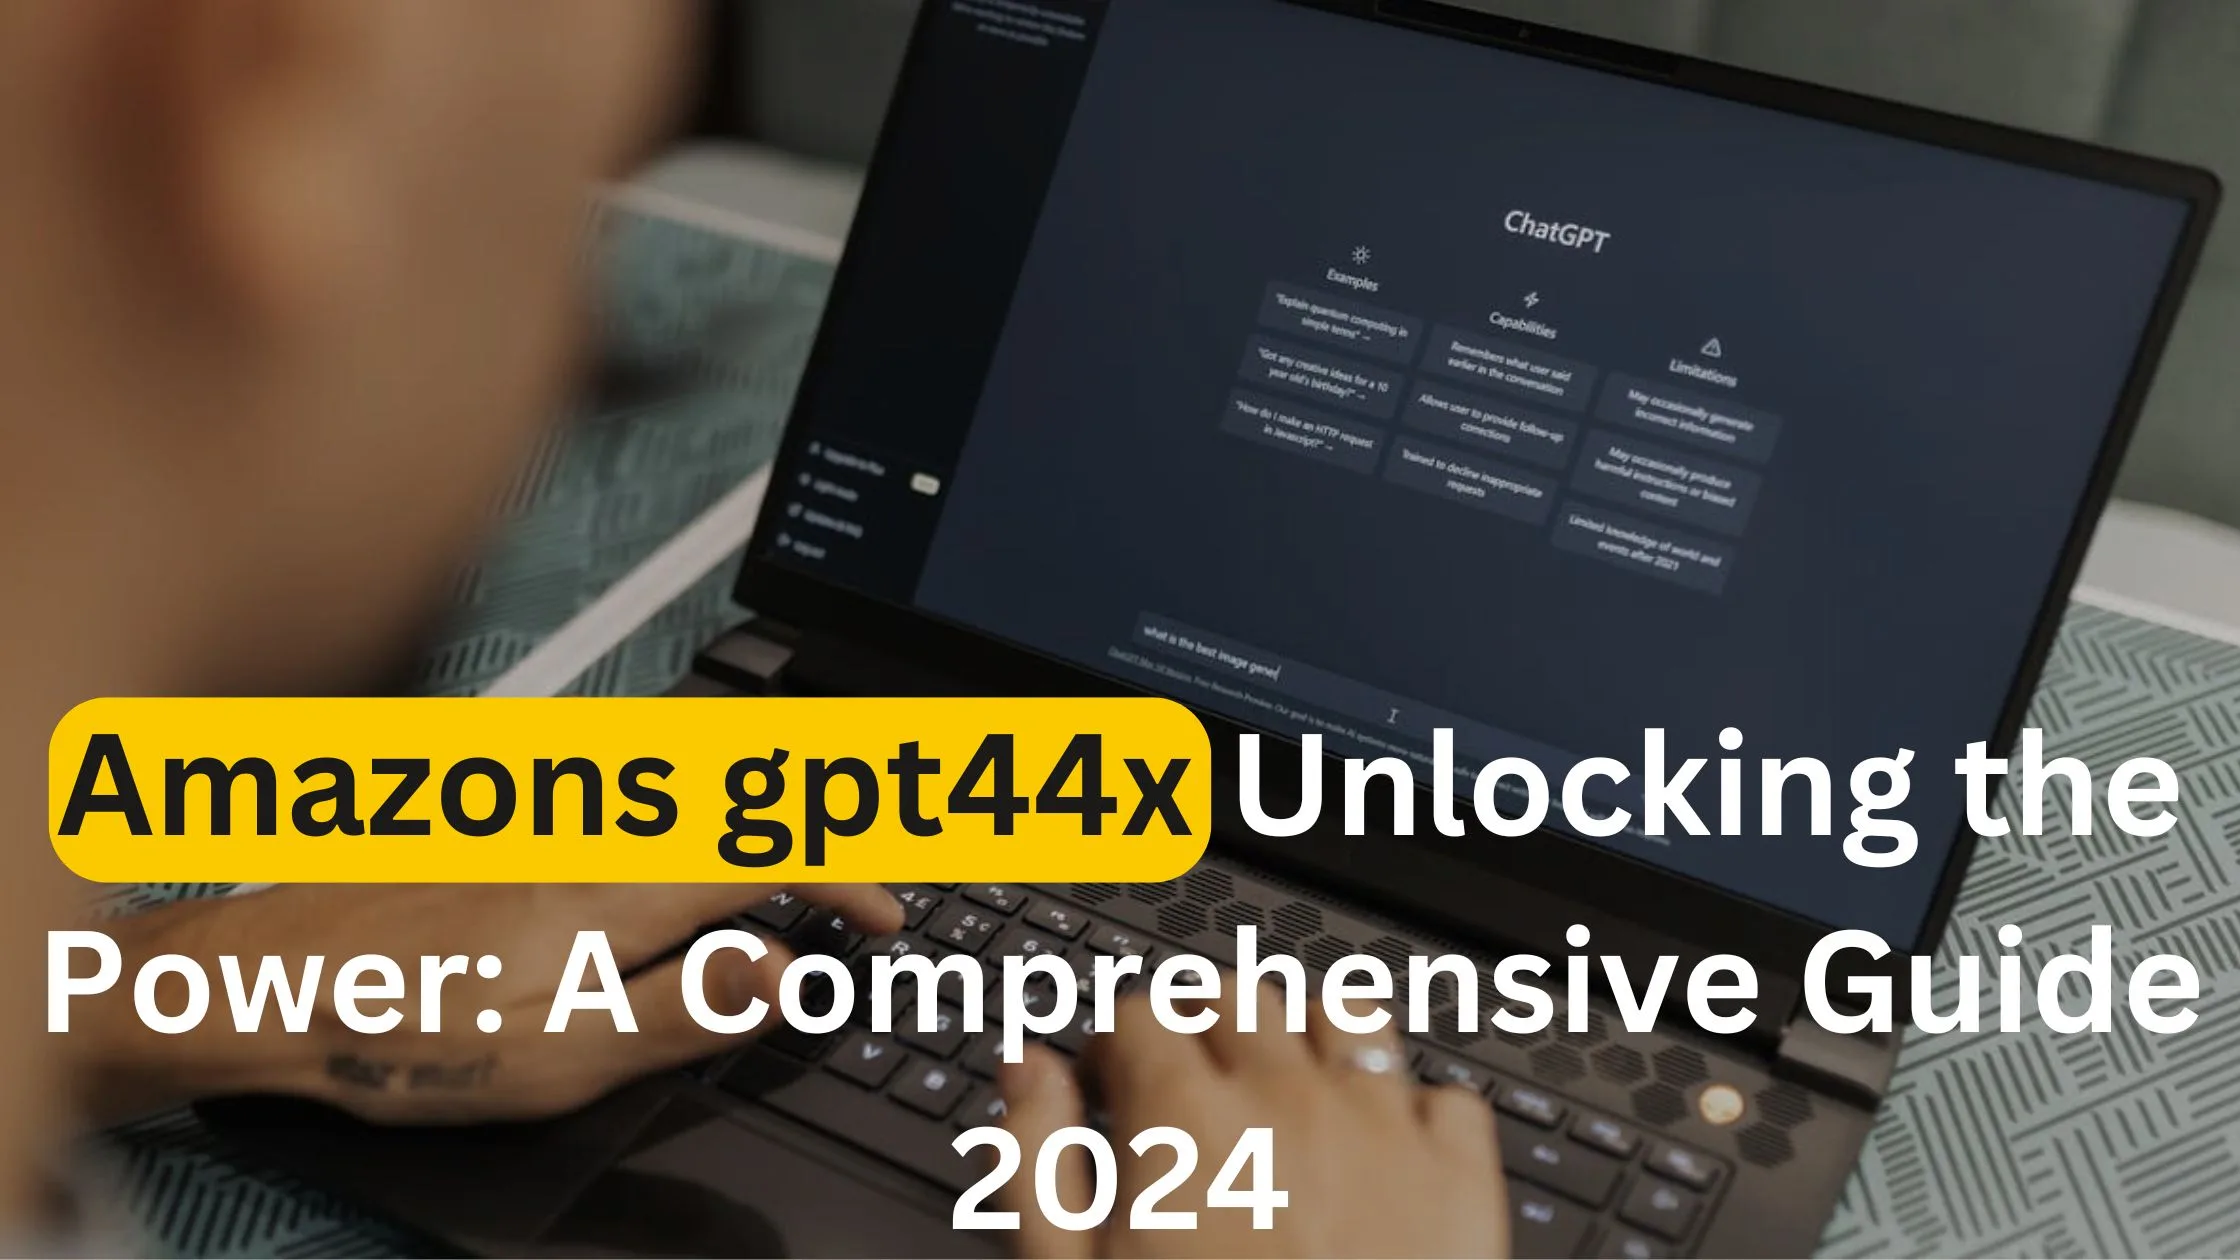 Amazons gpt44x Unlocking the Power: A Comprehensive Guide 2024